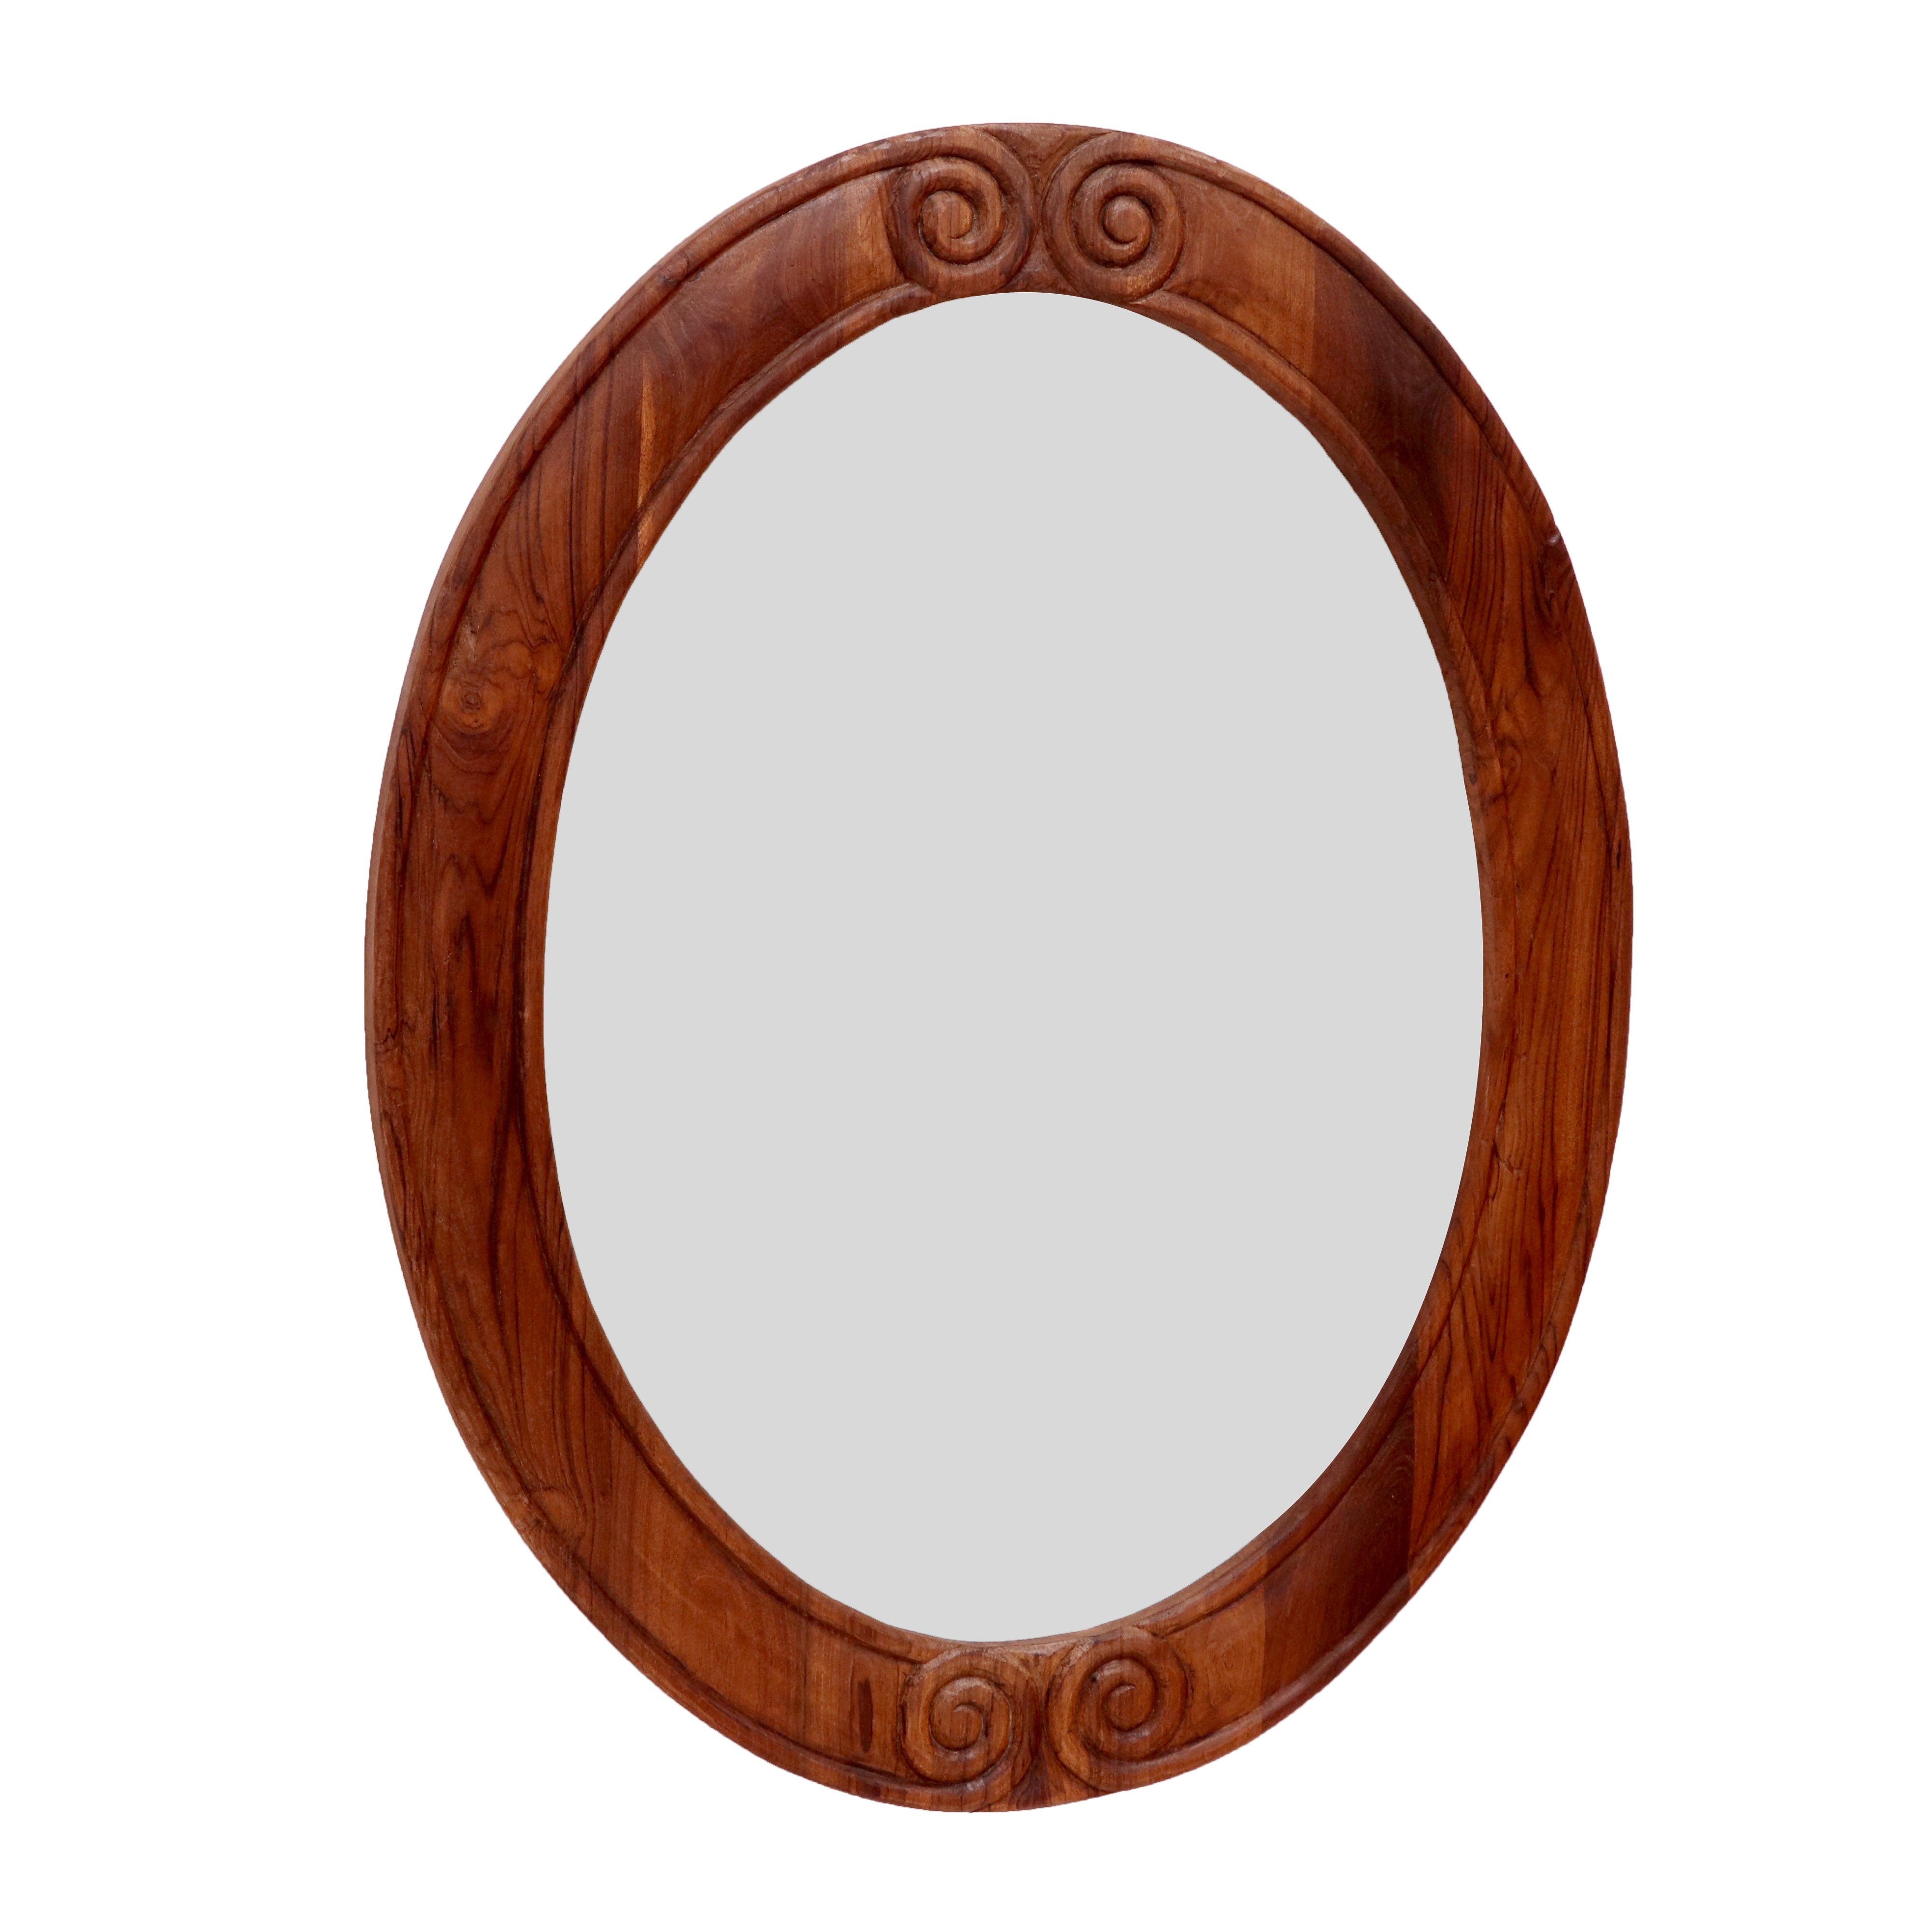 Oval shaped brown tone french wall hanging mirror Mirror